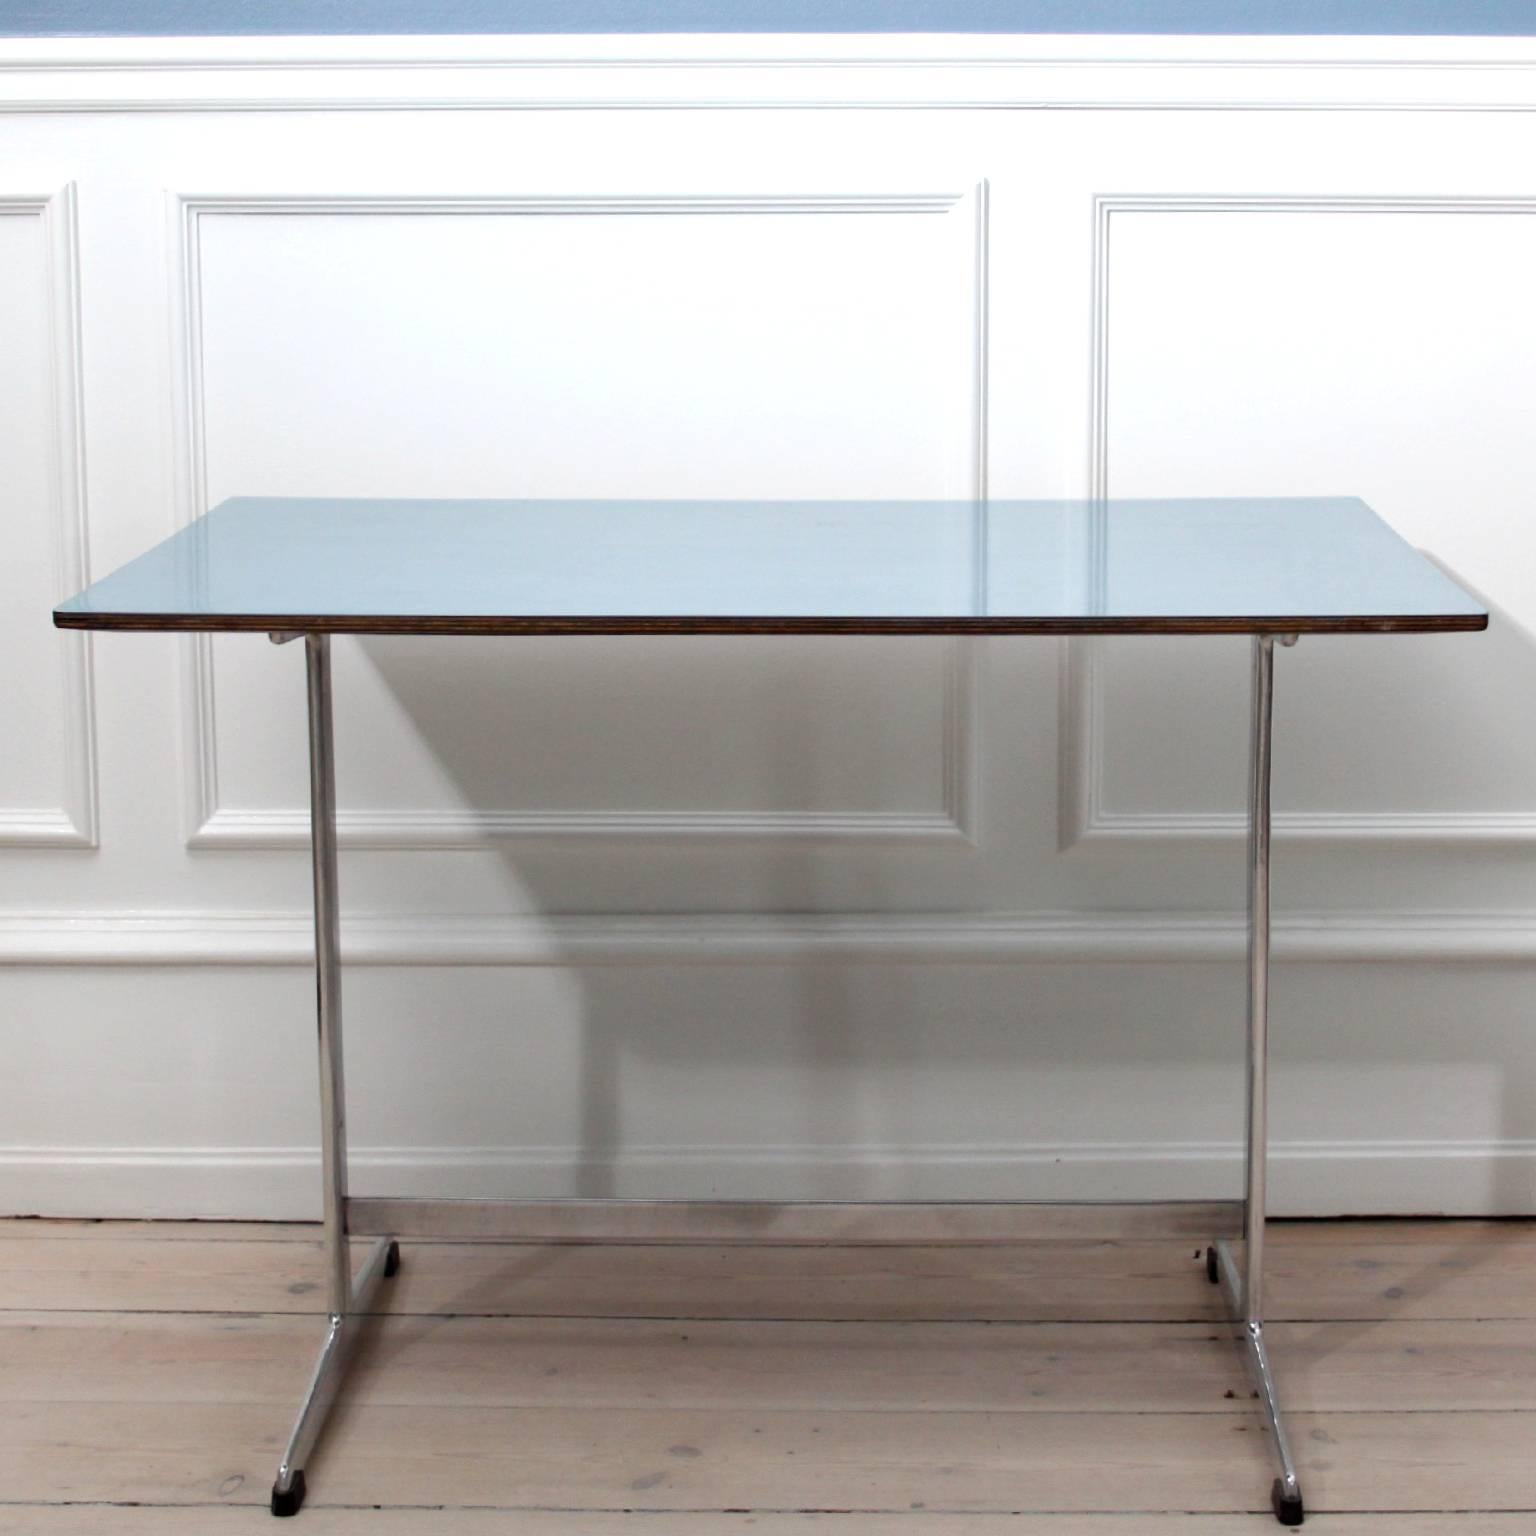 Mid-Century Modern Arne Jacobsen Table in Blue Formica for Iconic SAS Royal Hotel, 1950's